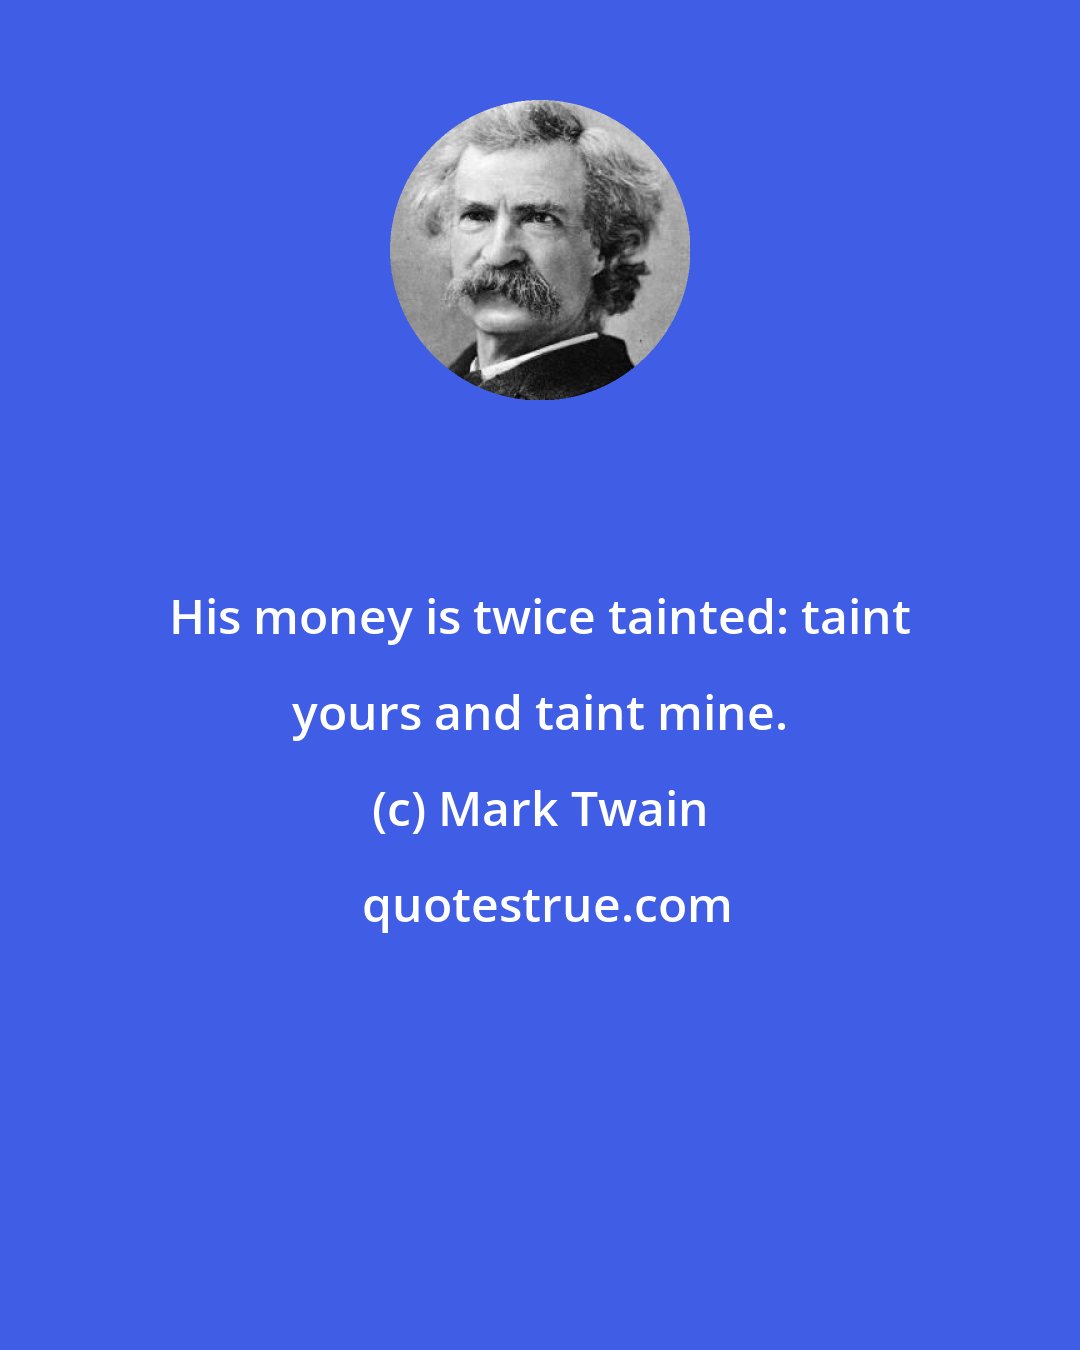 Mark Twain: His money is twice tainted: taint yours and taint mine.